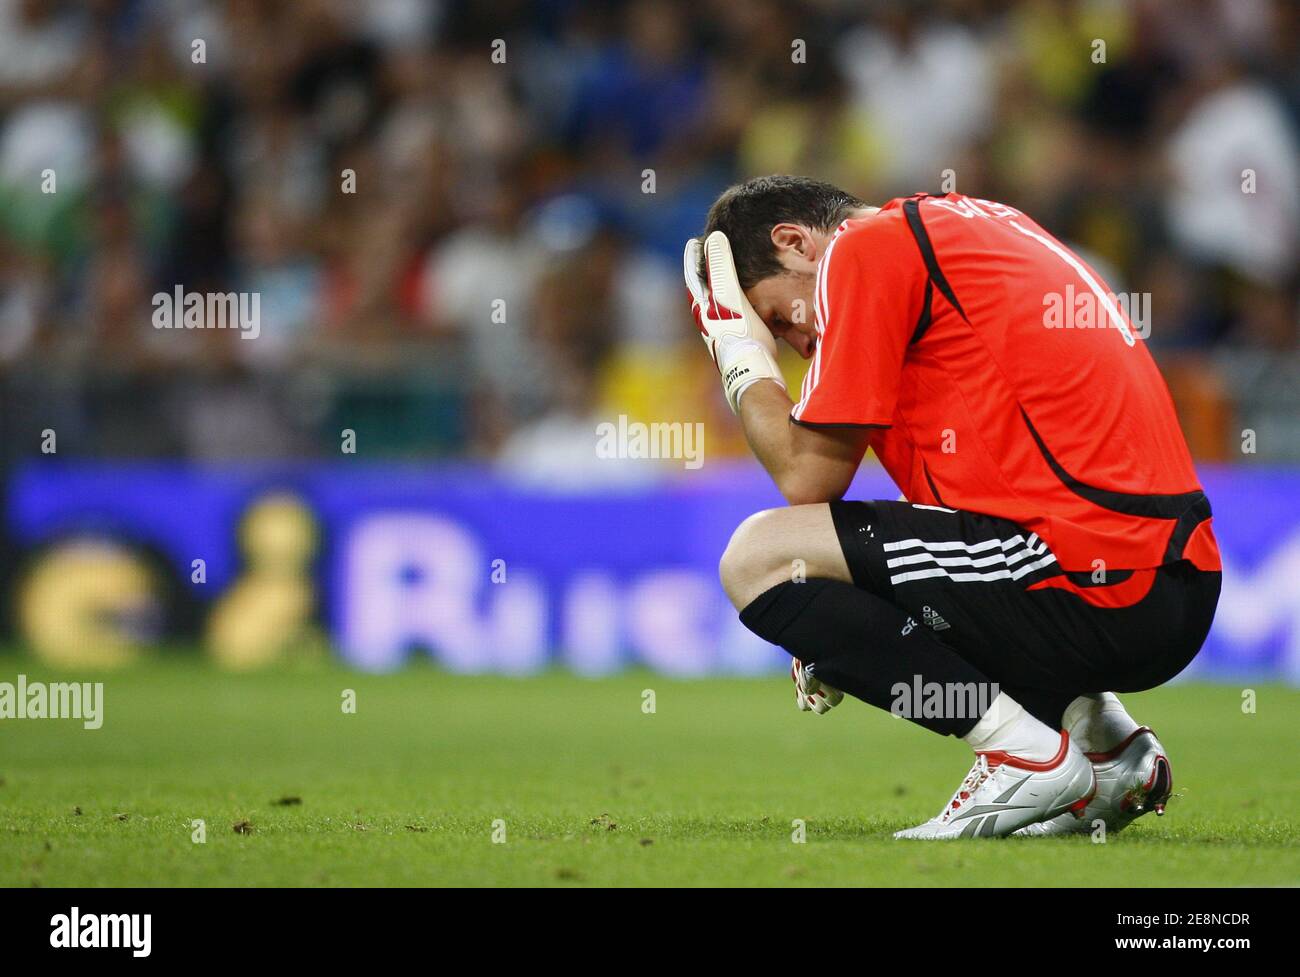 Real Madrid's goalkeeper Iker Casillas dejected during the Spanish Super Cup tournament, Real Madrid vs FC Sevilla at the Santiago Bernabeu Stadium in Madrid, Spain on August 19, 2007. FC Seville won 5-3. Photo by Christian Liewig/ABACAPRESS.COM Stock Photo